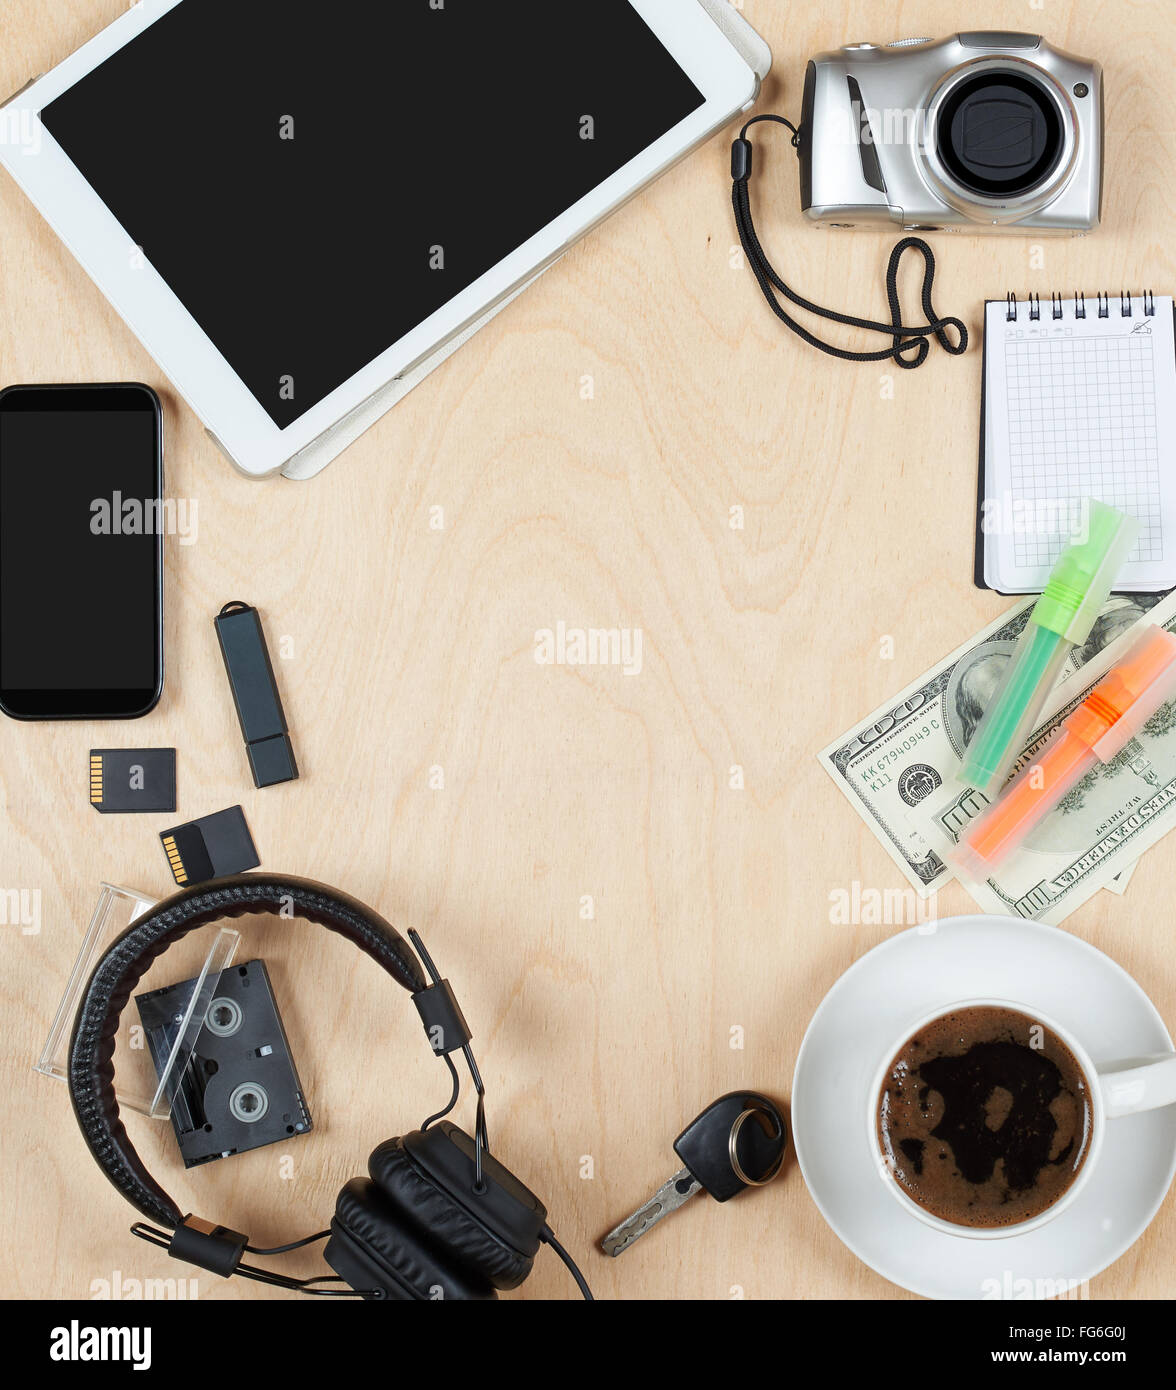 Flat lay of personal stuff, tablet computer,cards, coffee, money, camera photo and other. Flat design and top view on desk as fr Stock Photo